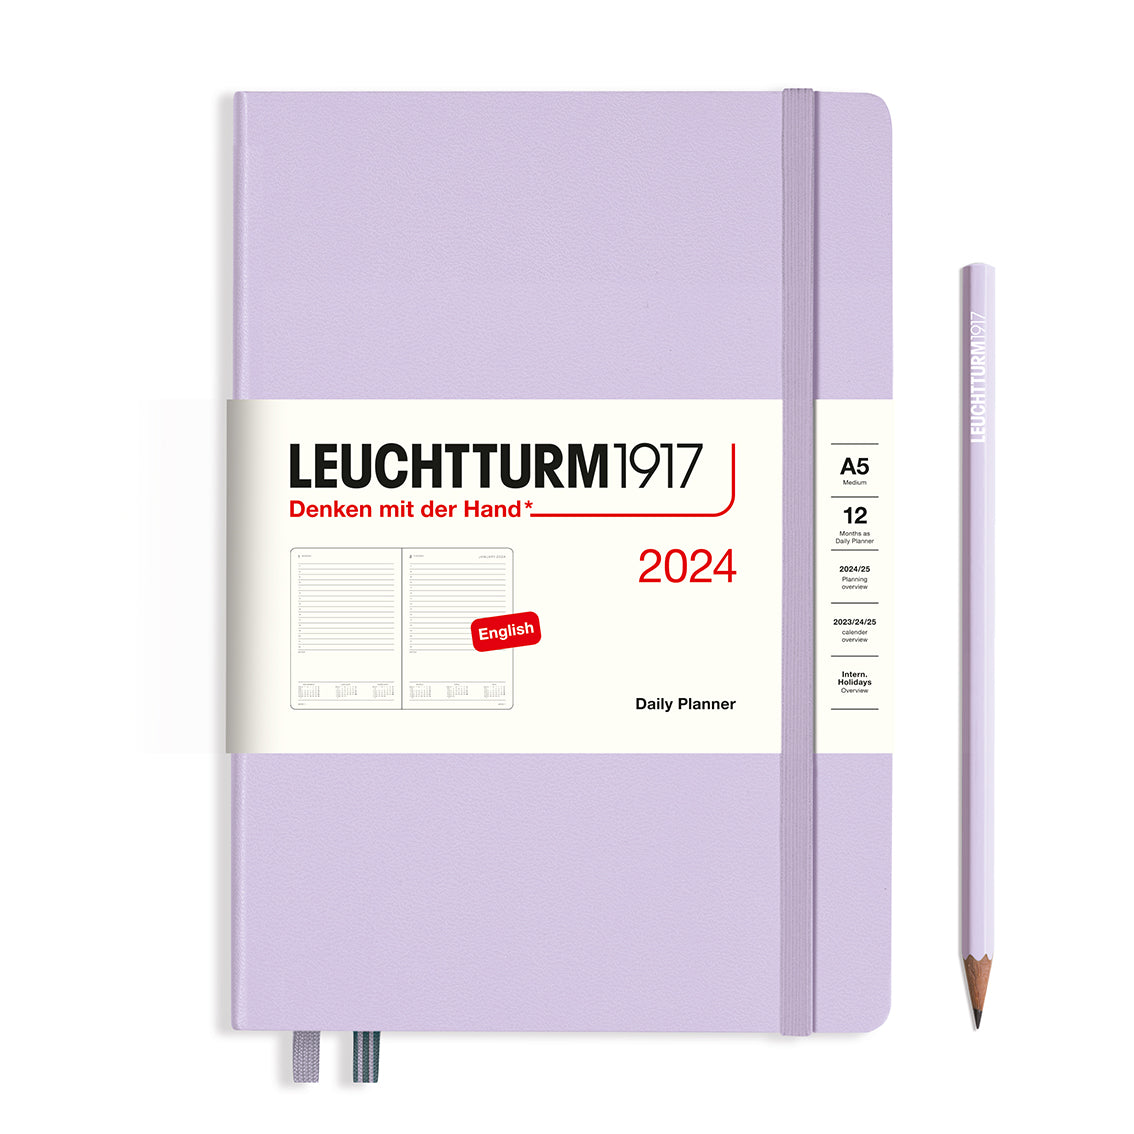 An image of a lilac planner with a lilac elastic band holding it together and a cream paper wrap around the middle stating the business name Leuchtturm1917, that it is for the year 2024, it is a daily planner, is A5 in size and an English language version. It has an image on the wrap showing the inside layout which is 1 day per page. A lilac pencil is shown at the side of the planner.